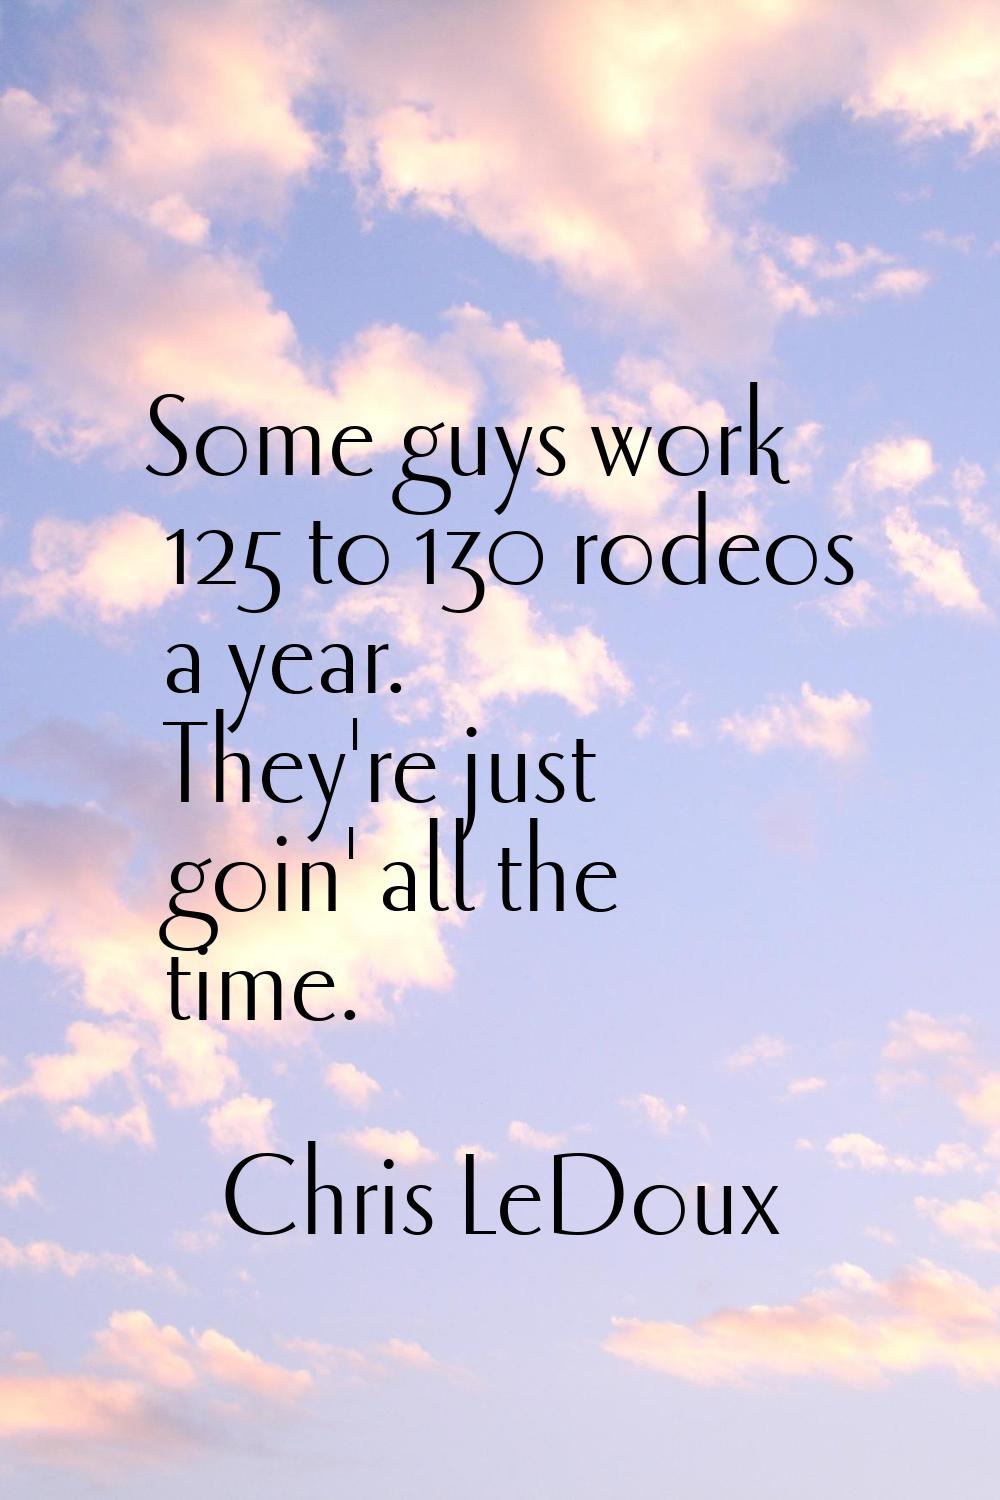 Some guys work 125 to 130 rodeos a year. They're just goin' all the time.